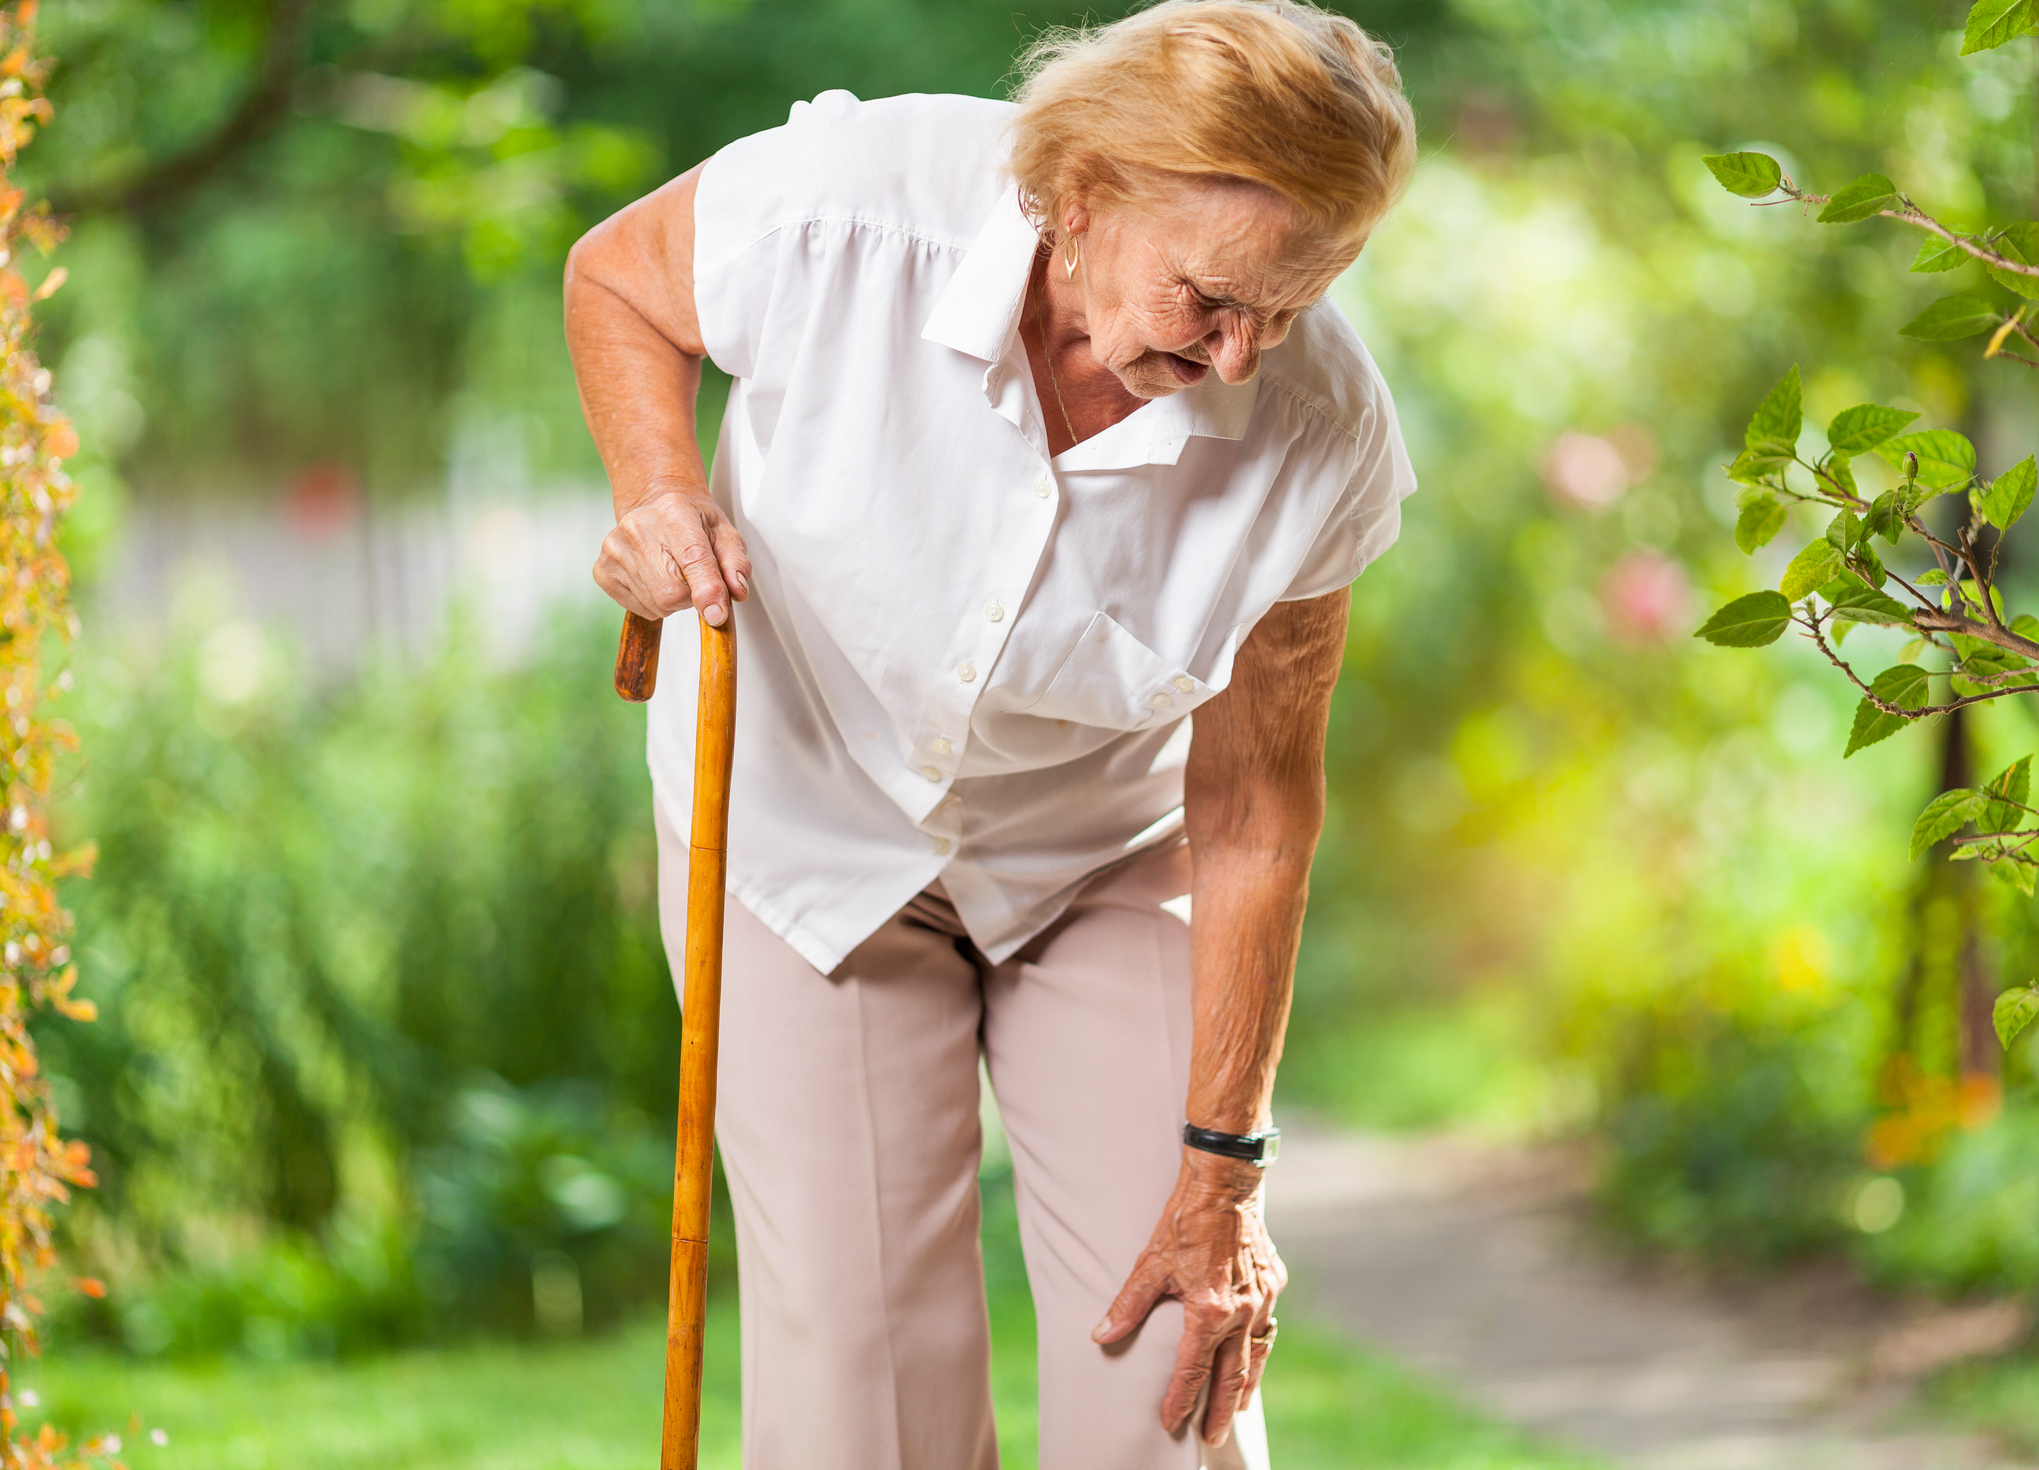 Senior joint pain can increase the risk of falls in the elderly.